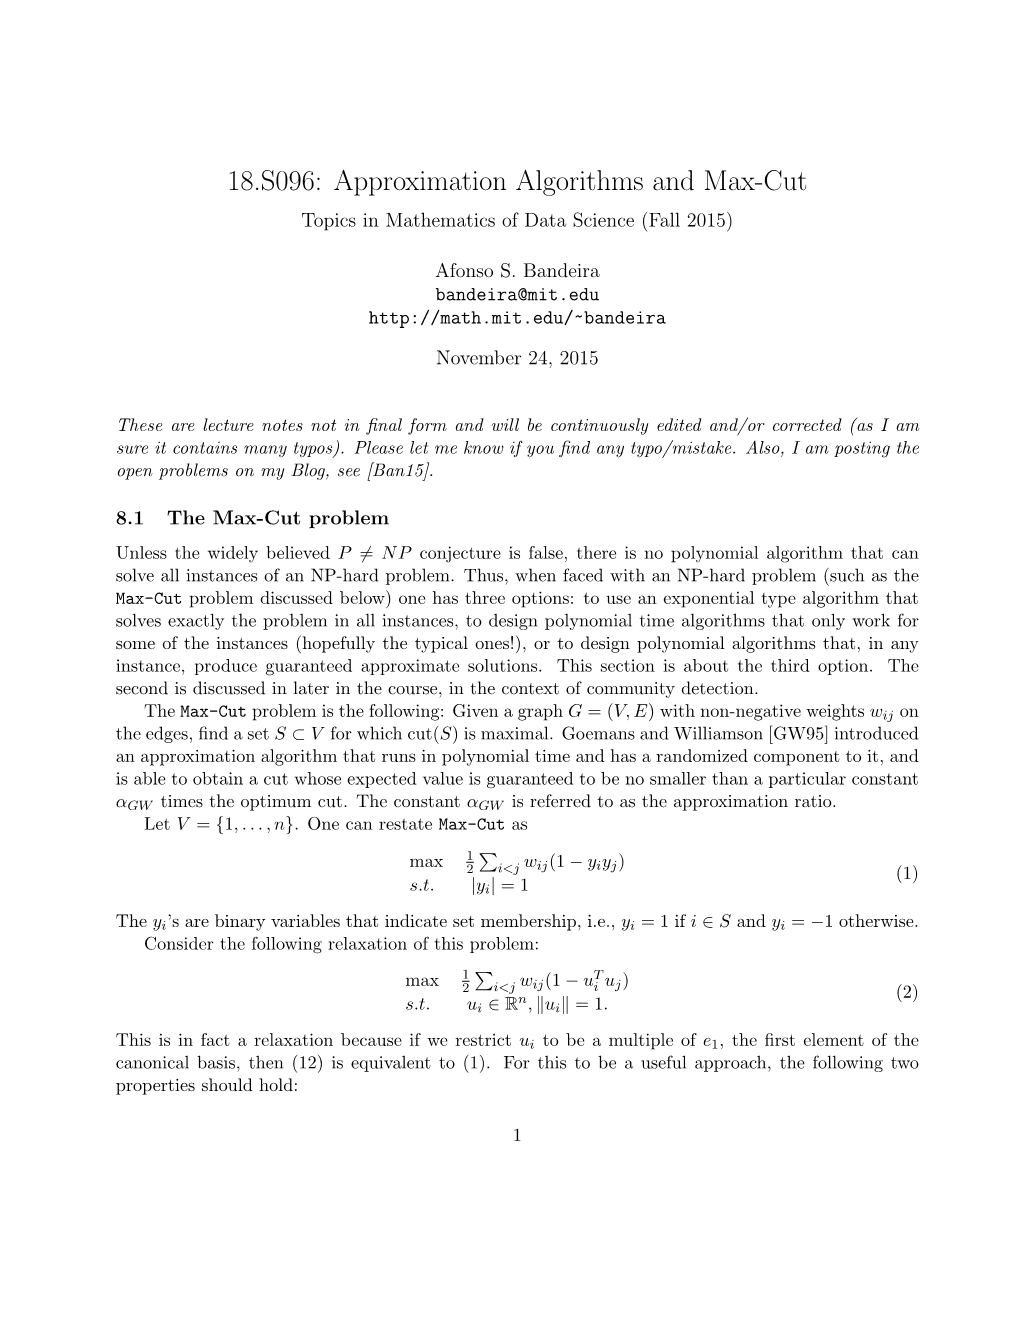 Approximation Algorithms and Max-Cut Topics in Mathematics of Data Science (Fall 2015)